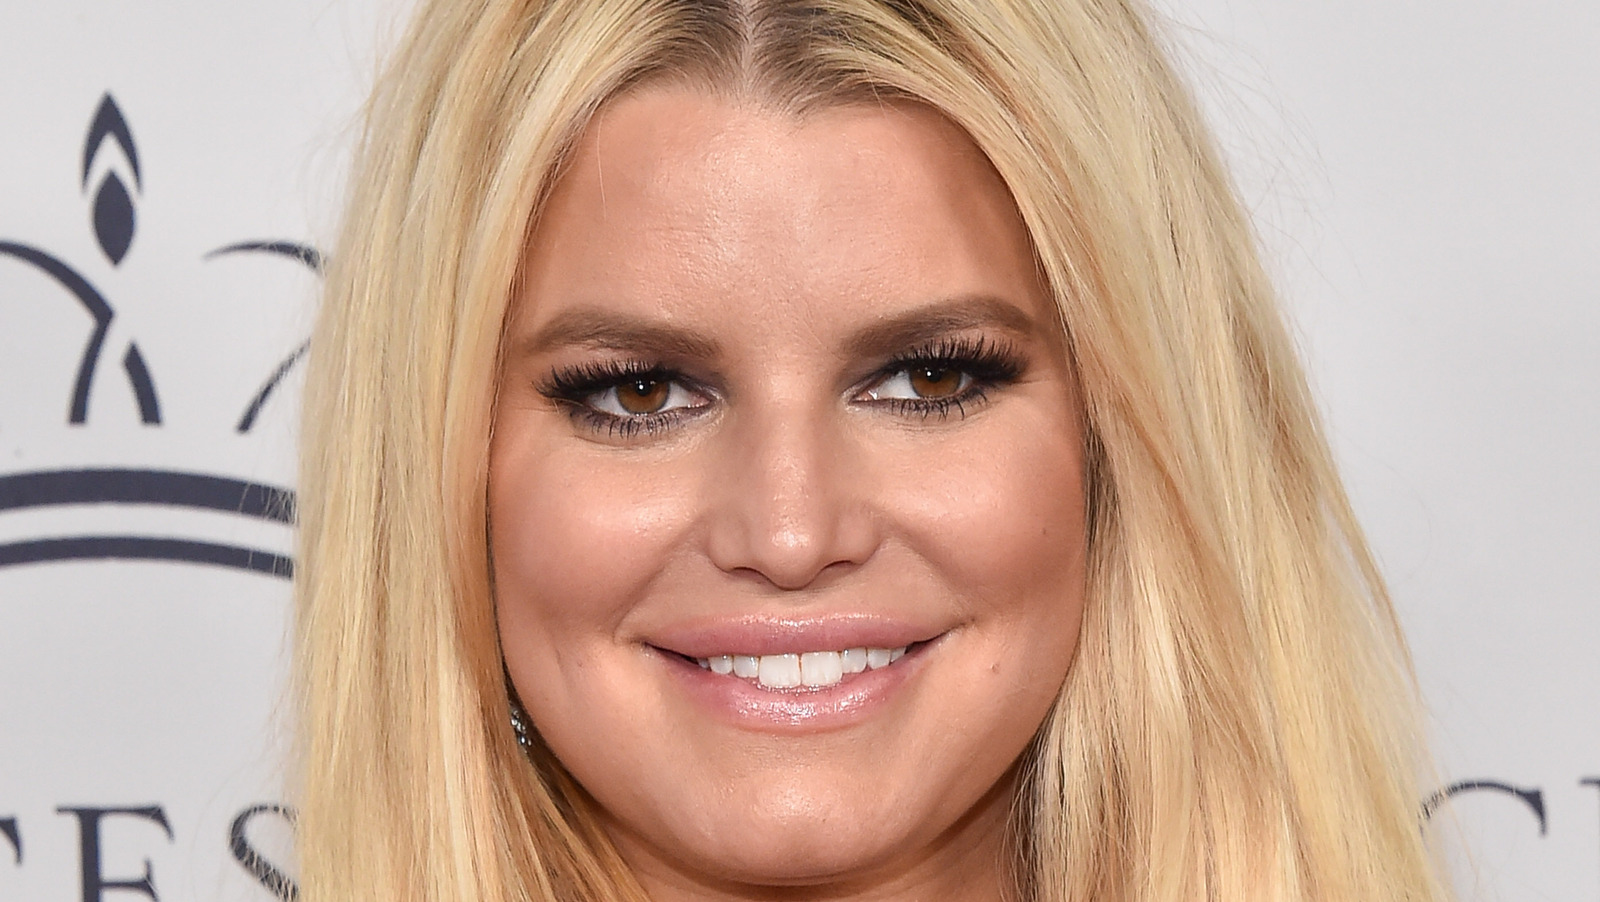 Jessica Simpson Was Willing To Go This Far To Save Her Company